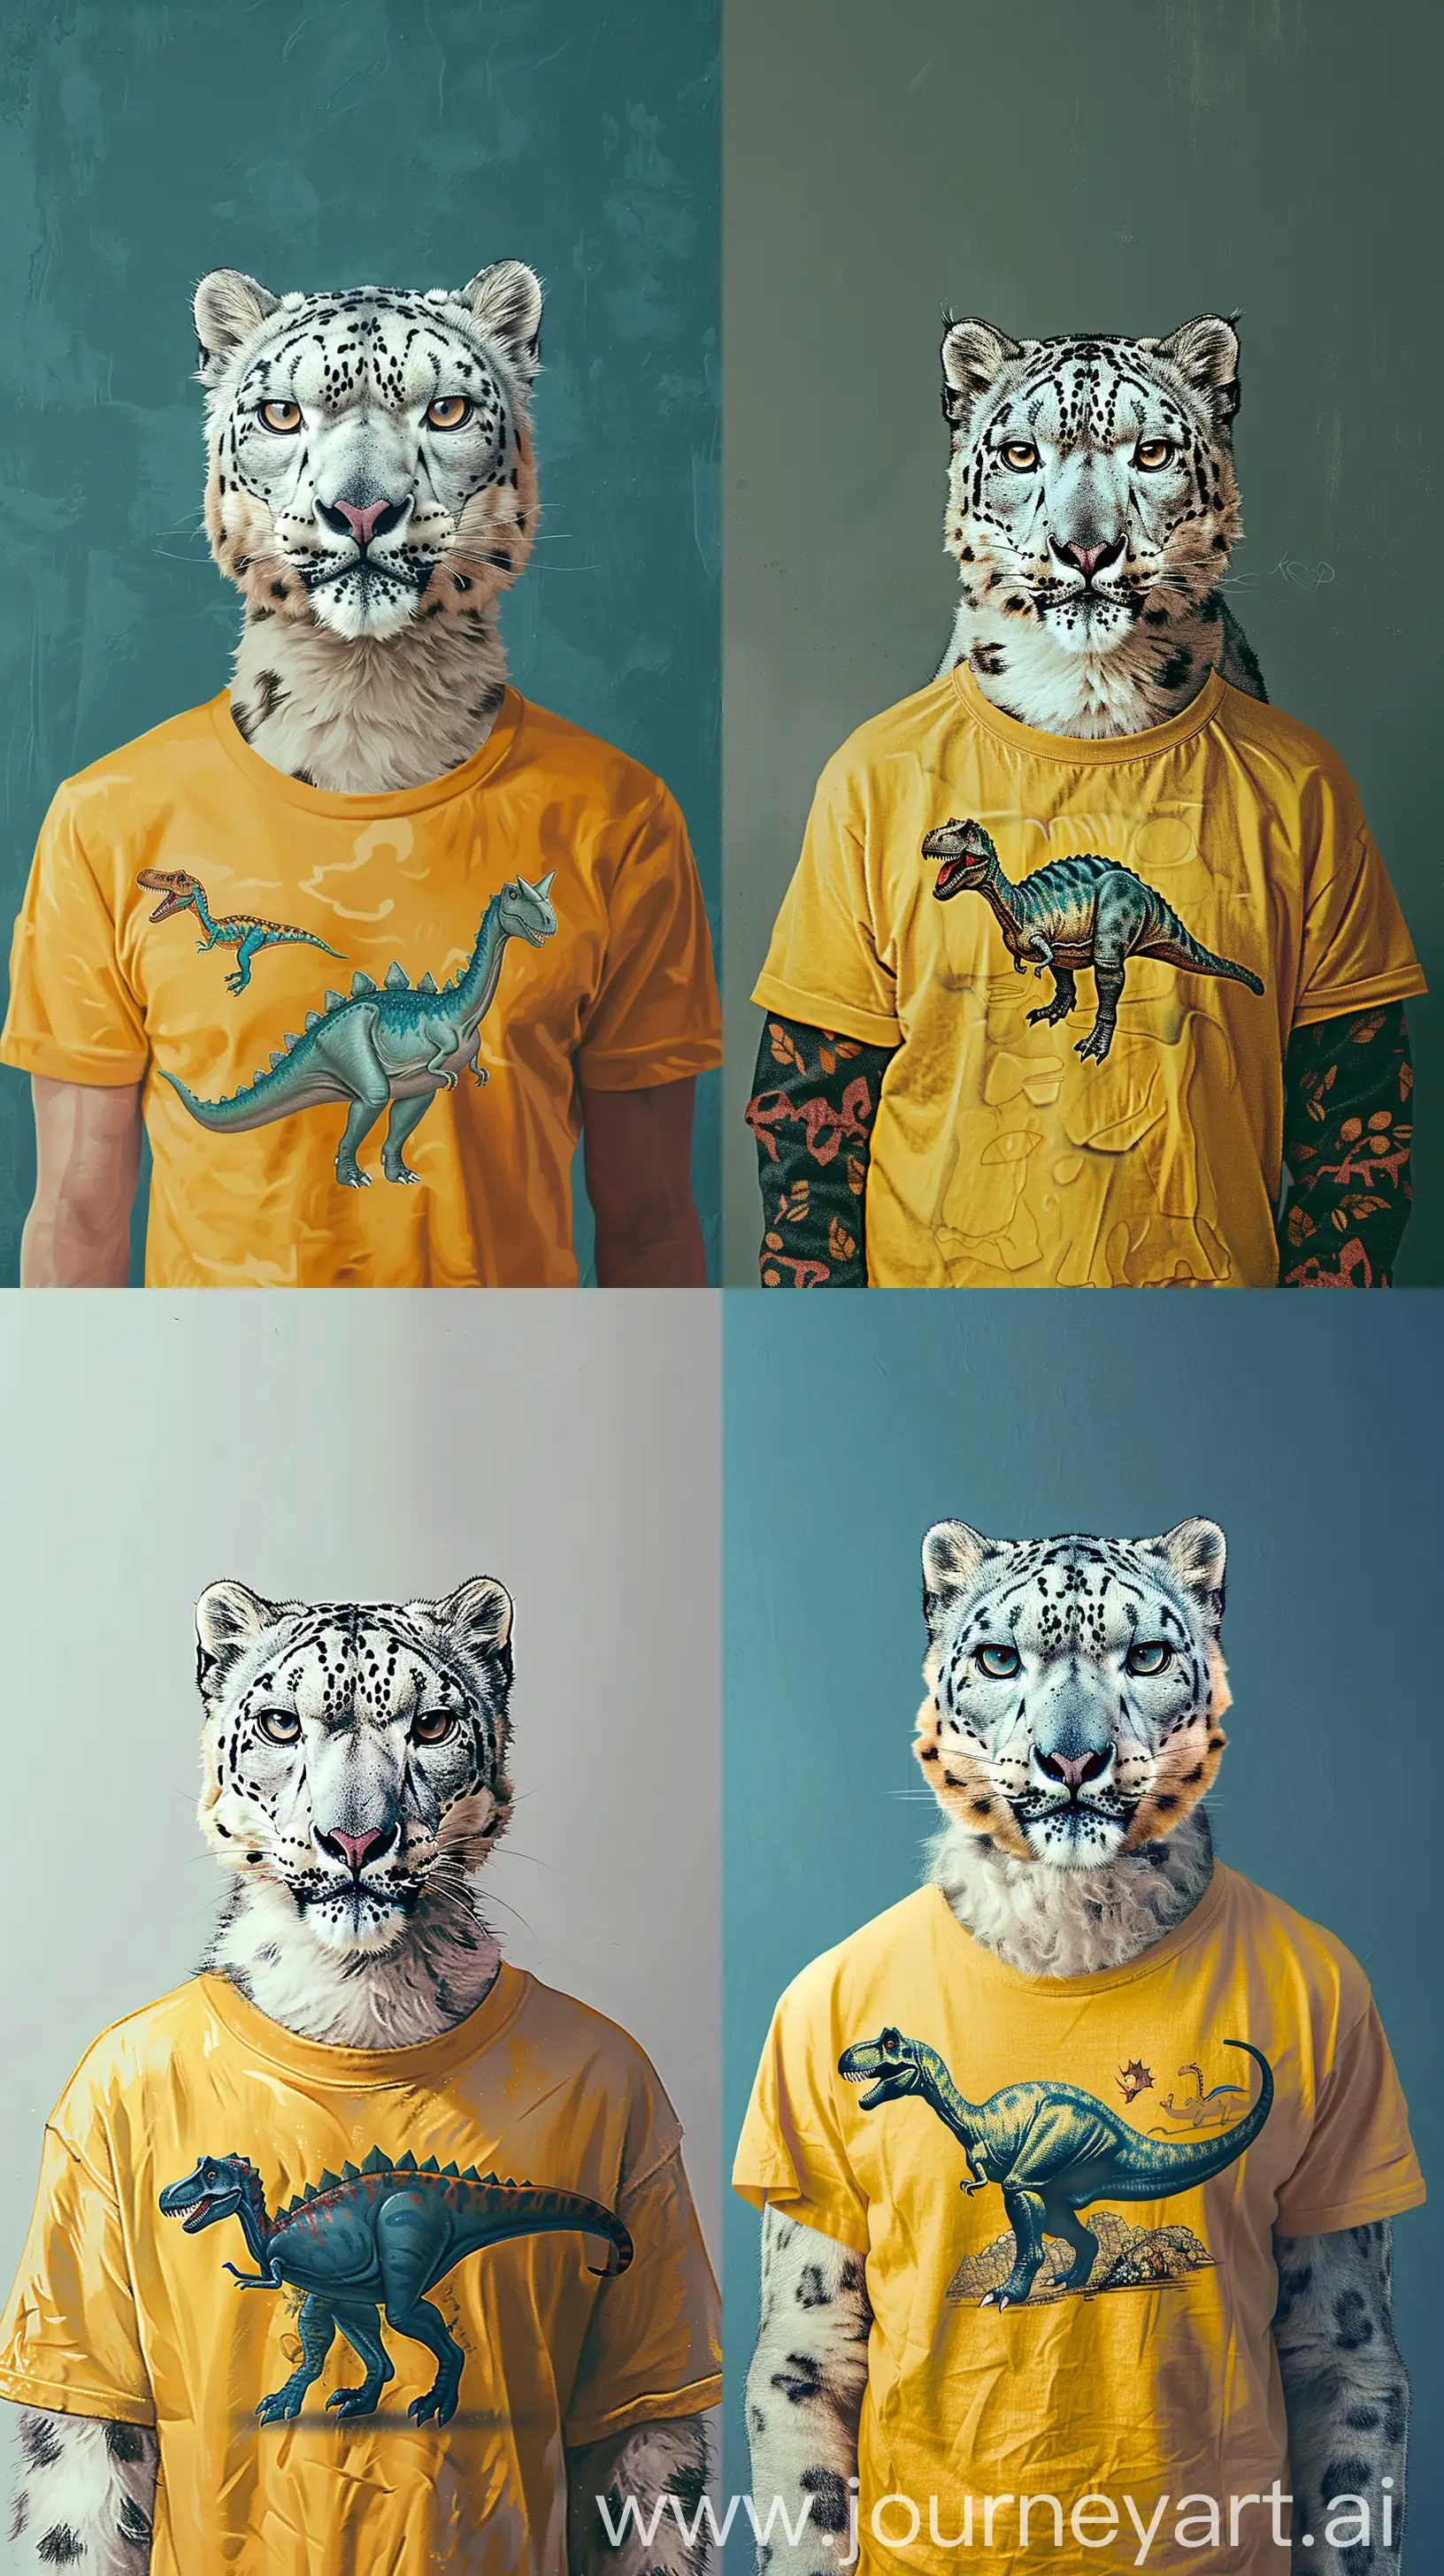 Kees van dongen art style of a snow leopard as a man , wearing a yellow t shirt with a dinosaur on it, as phone wallpaper,   
--ar 9:16